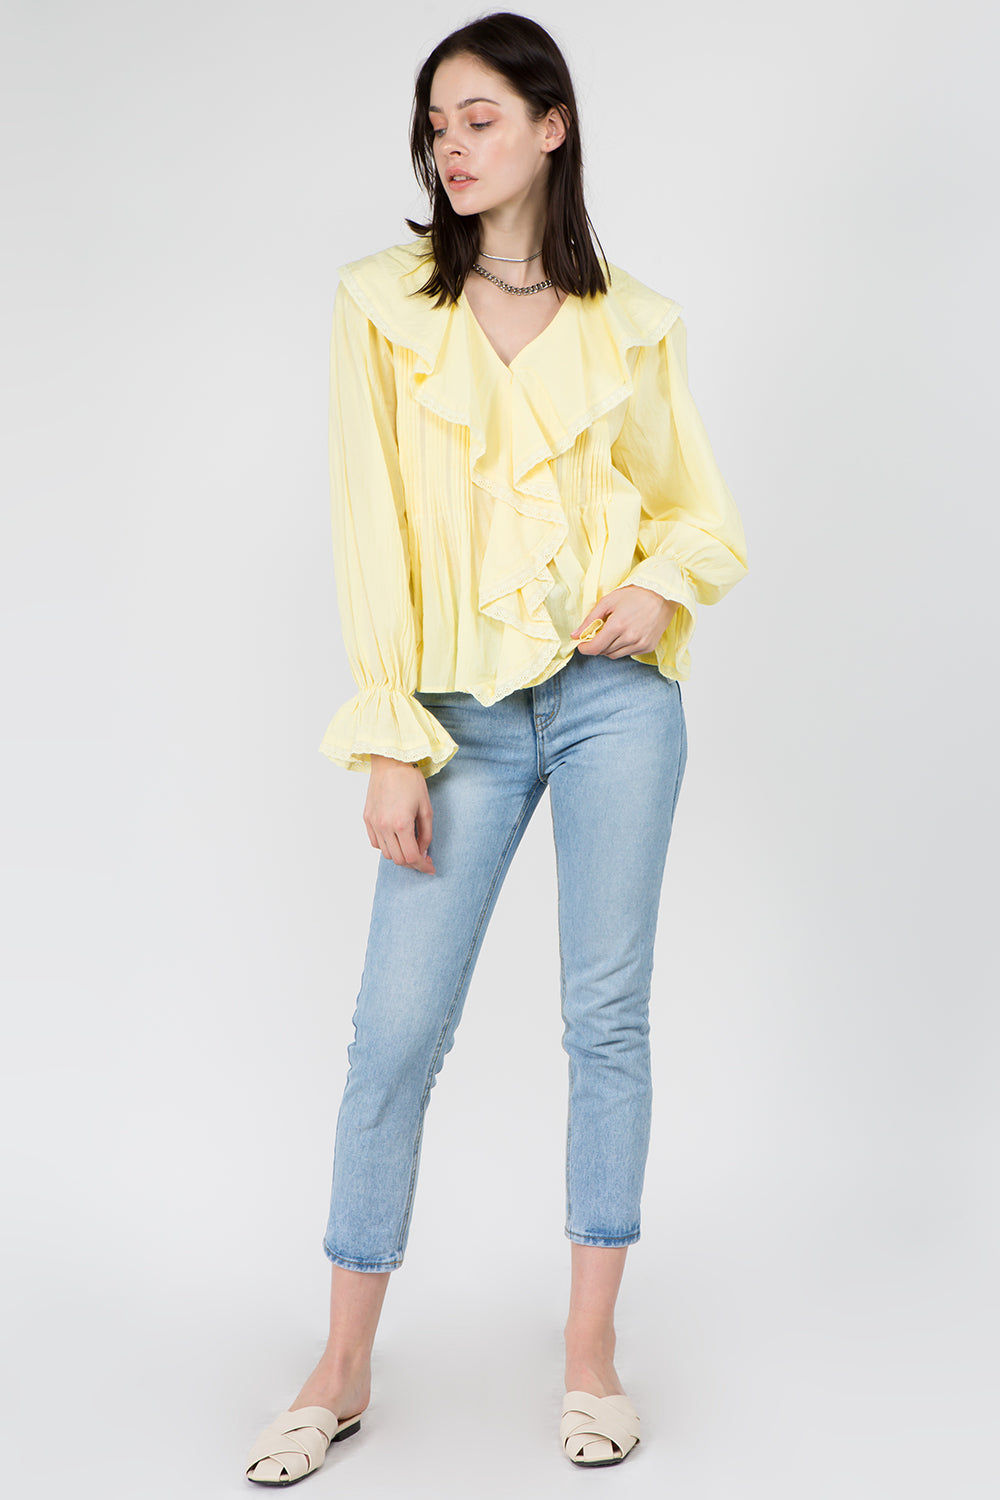 Lace Trimmed Ruffle Blouse - Whiteroom+Cactus